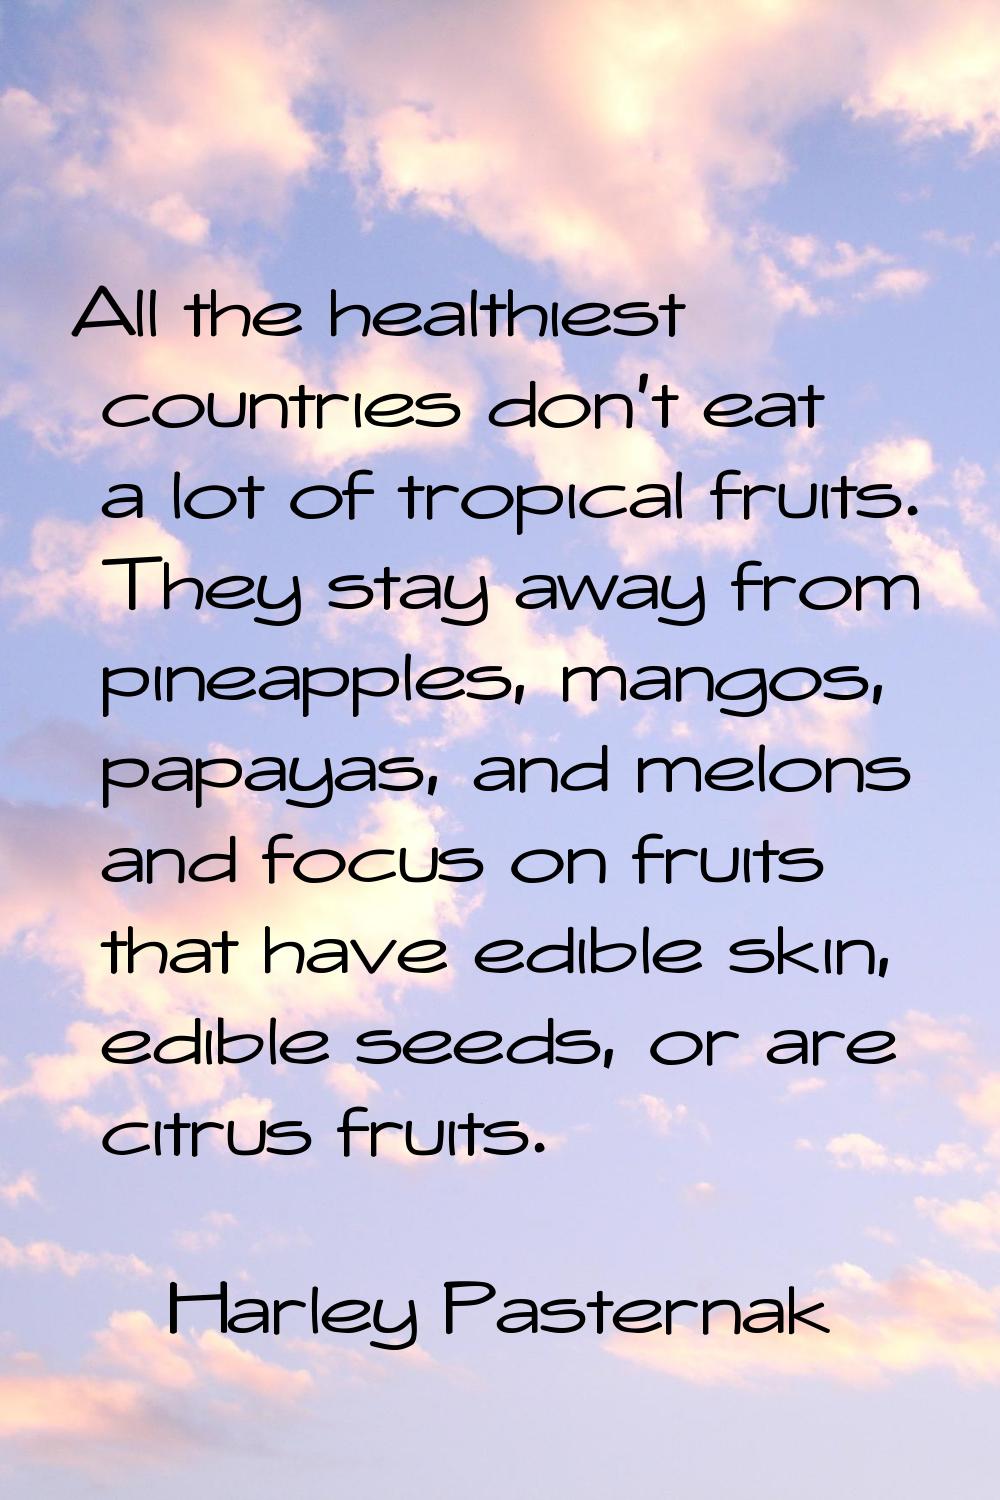 All the healthiest countries don't eat a lot of tropical fruits. They stay away from pineapples, ma